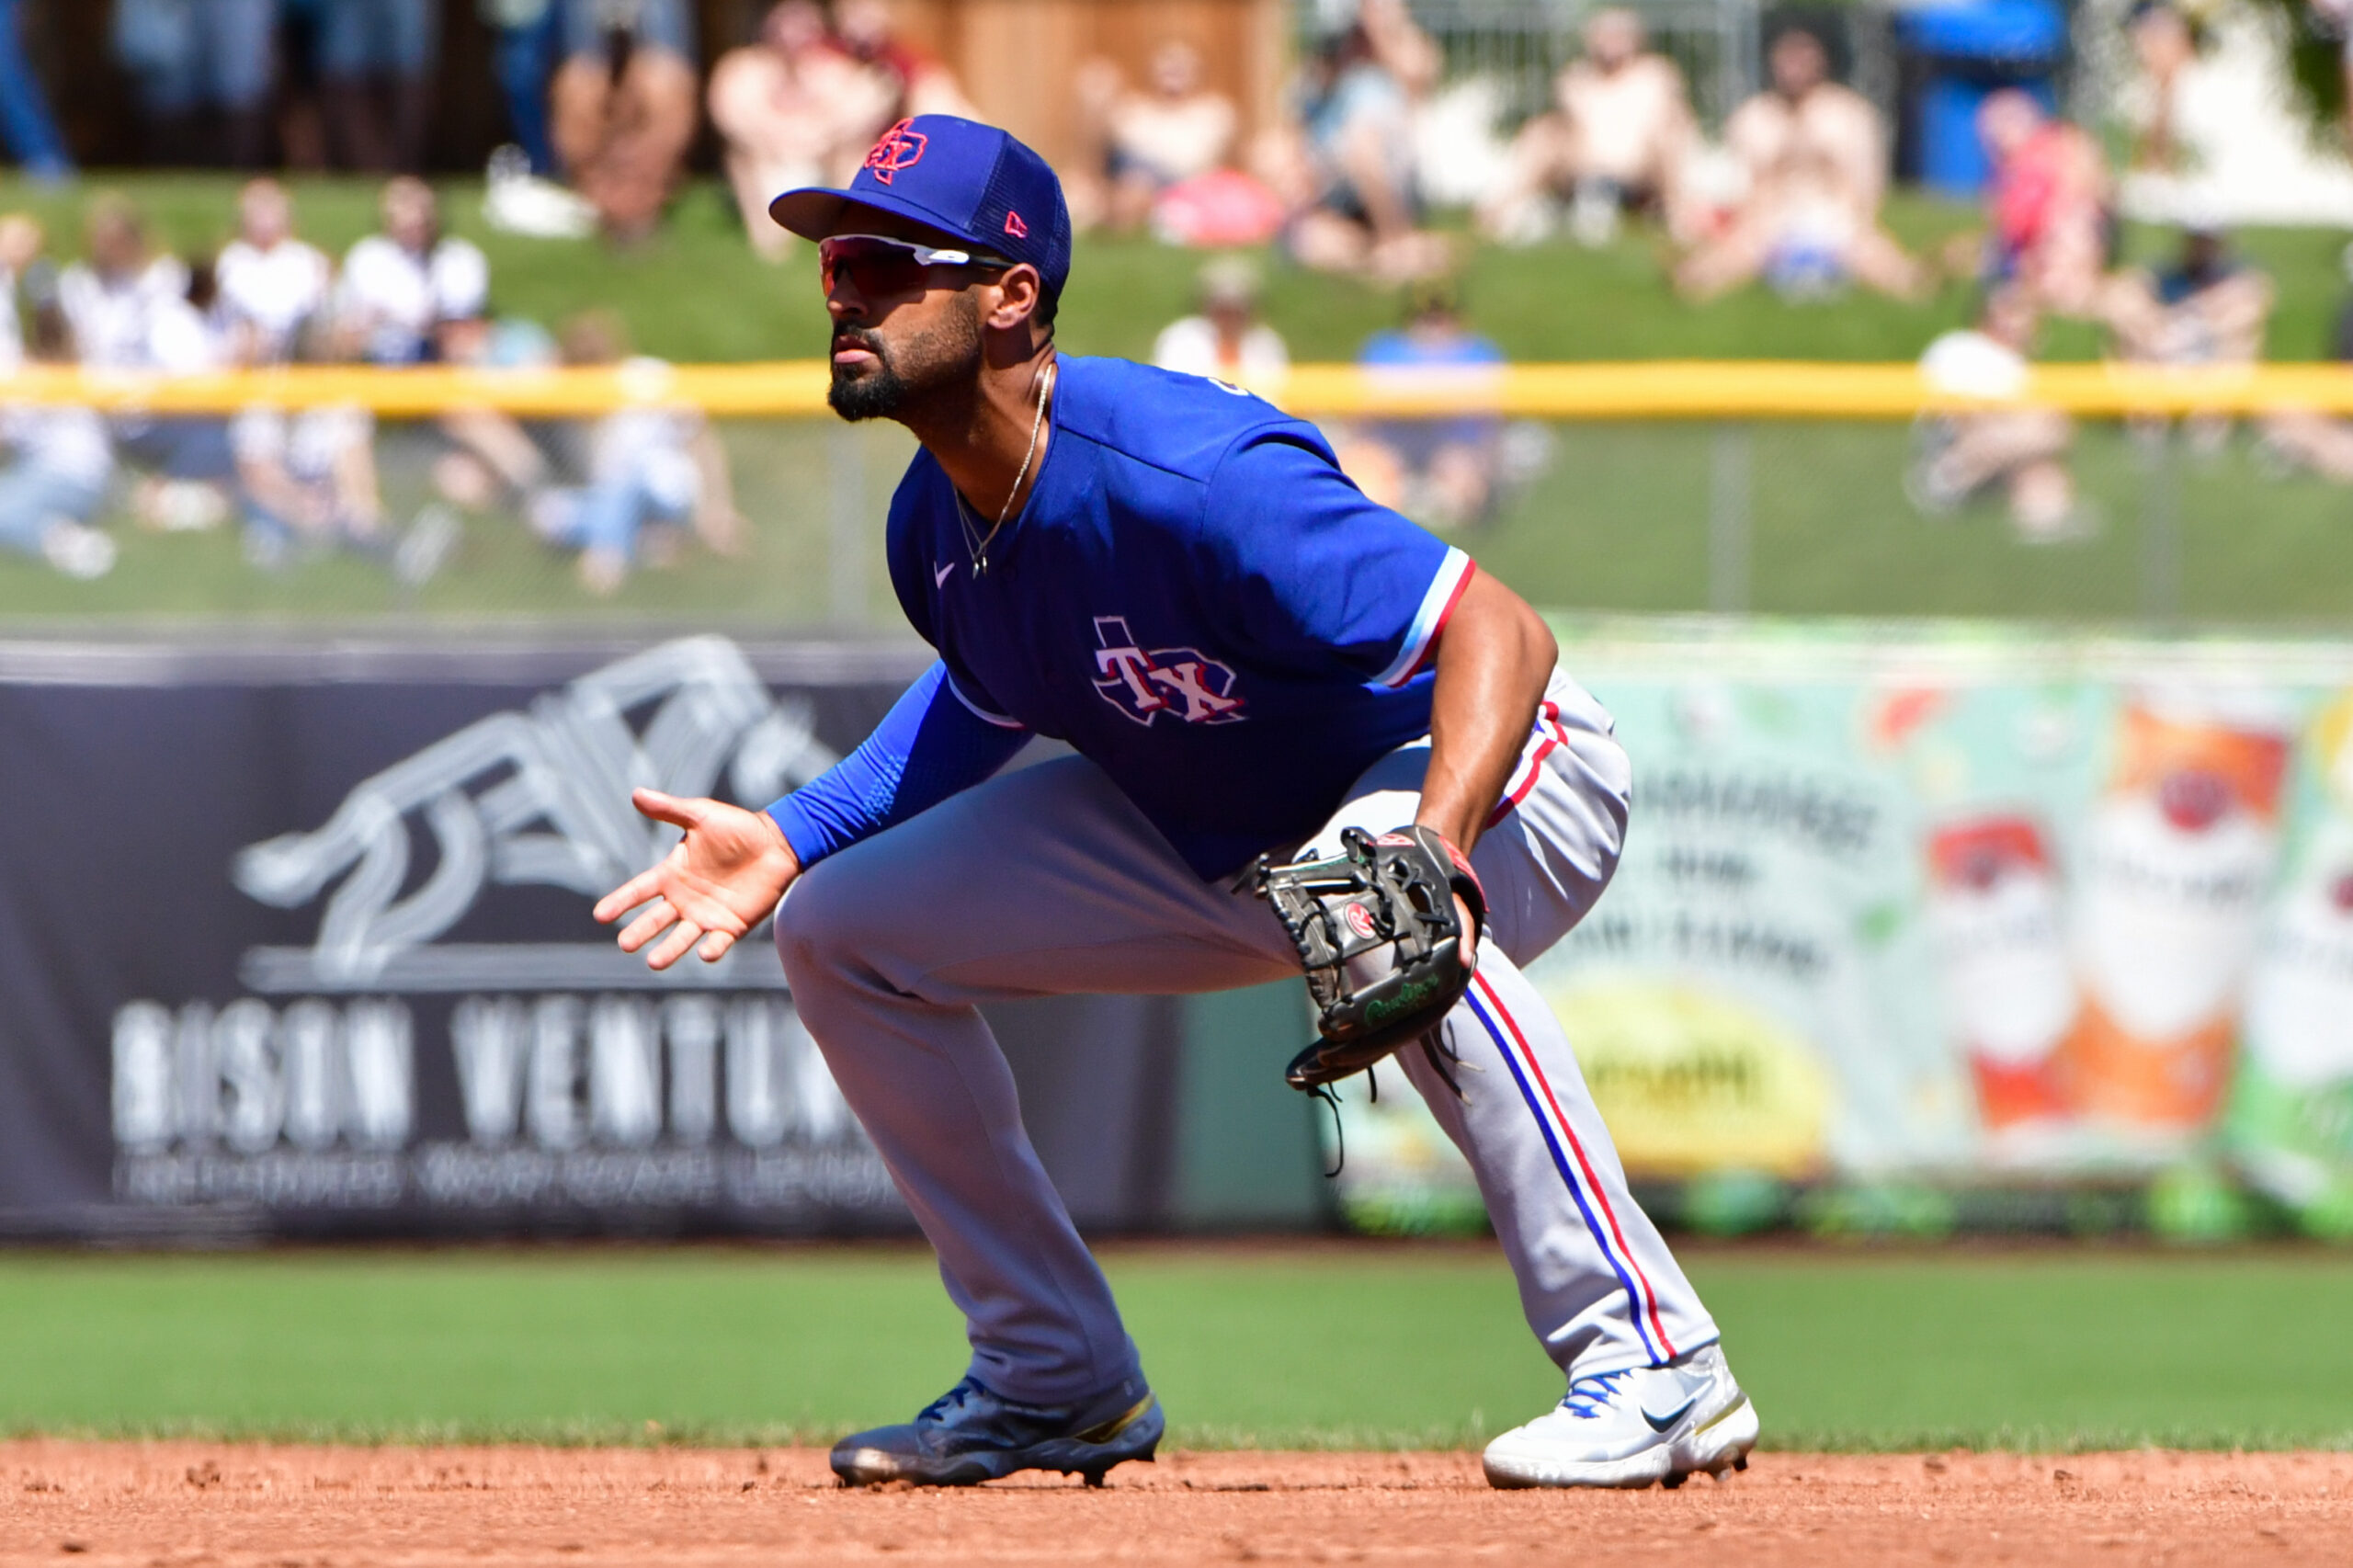 Pay attention to Rangers catching prospect Jose Trevino - Minor League Ball